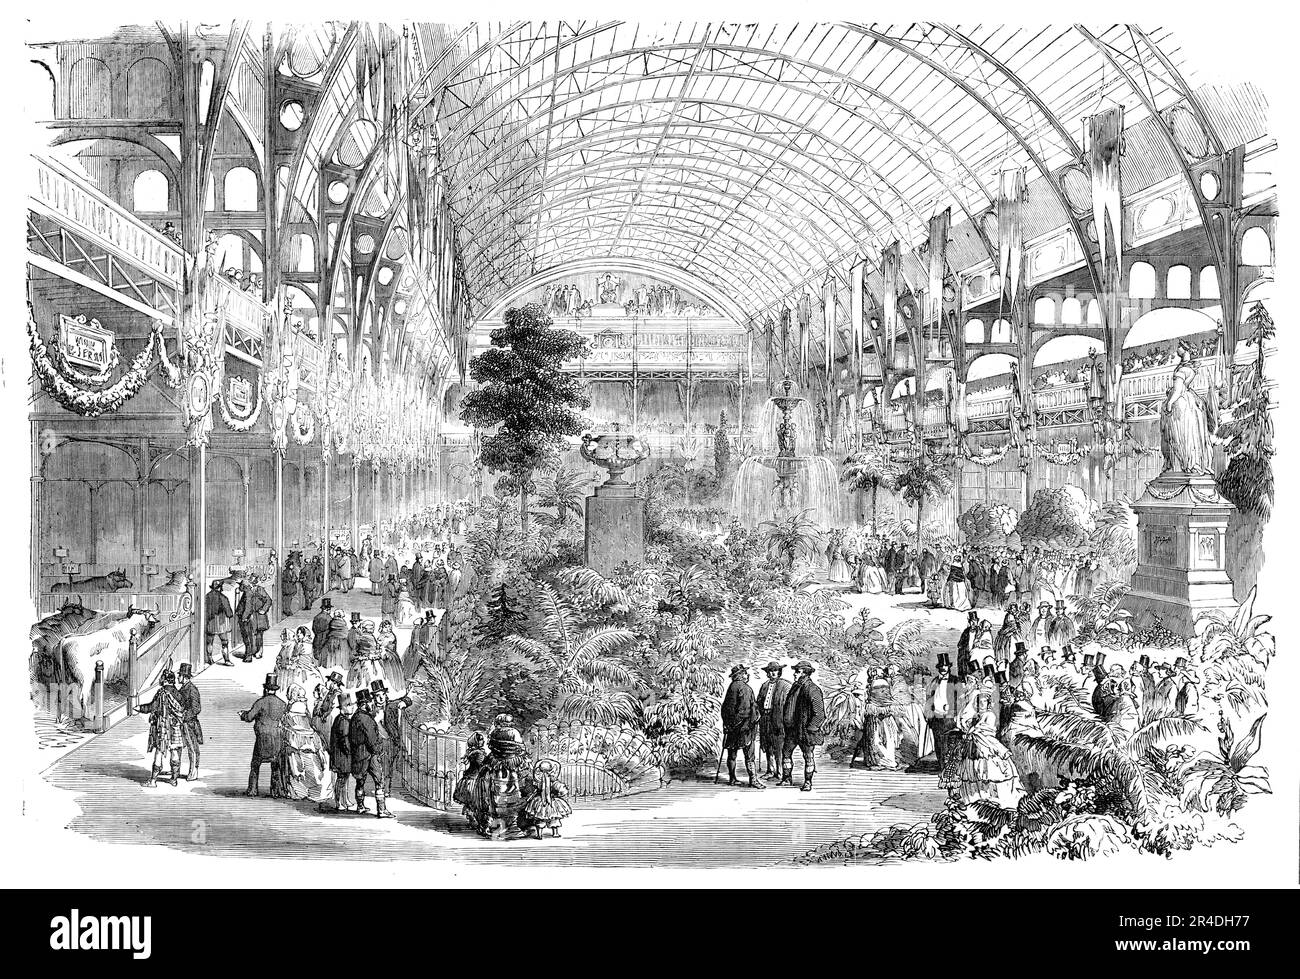 The Universal Cattle Show and Agricultural Exhibition, Paris, 1856. Visitors at the Palais de l'lndustrie. '...the ground in the centre of the building...has been transferred into a delicious garden...Grassplats with their velvet verdure, graceful flower-beds, shrubs, fountains, groups of statuary - all, in fine, that could refresh the sight, and shed a charm over the whole place, has been got together. Standing, from the gallery, one may fancy he was looking over some fair valley, rich in verdure and fragrant in flowers, while the singing of birds from aviaries half concealed amid the trees a Stock Photo